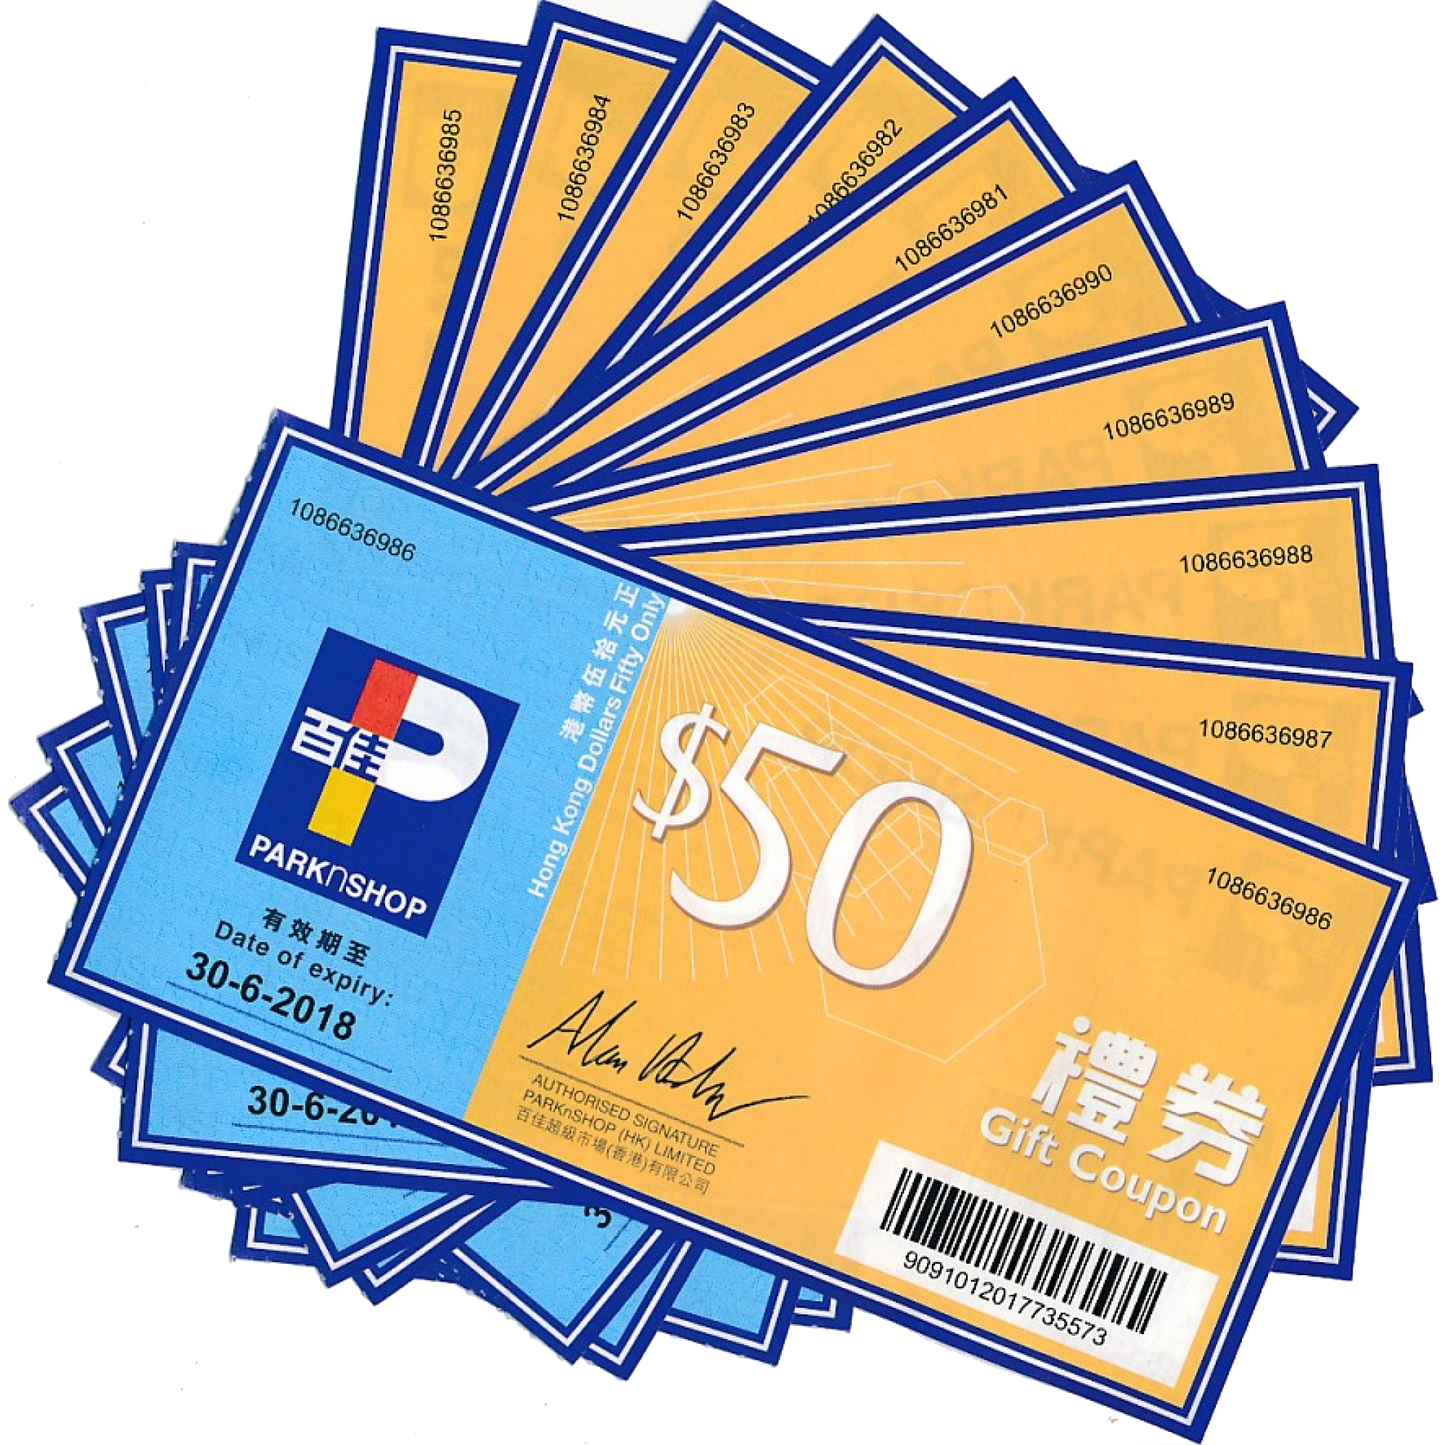 【Fast】AlipayHK Exclusive - TTC Basic Health Check Package $2999 Gift Coupon up to $1800 Value